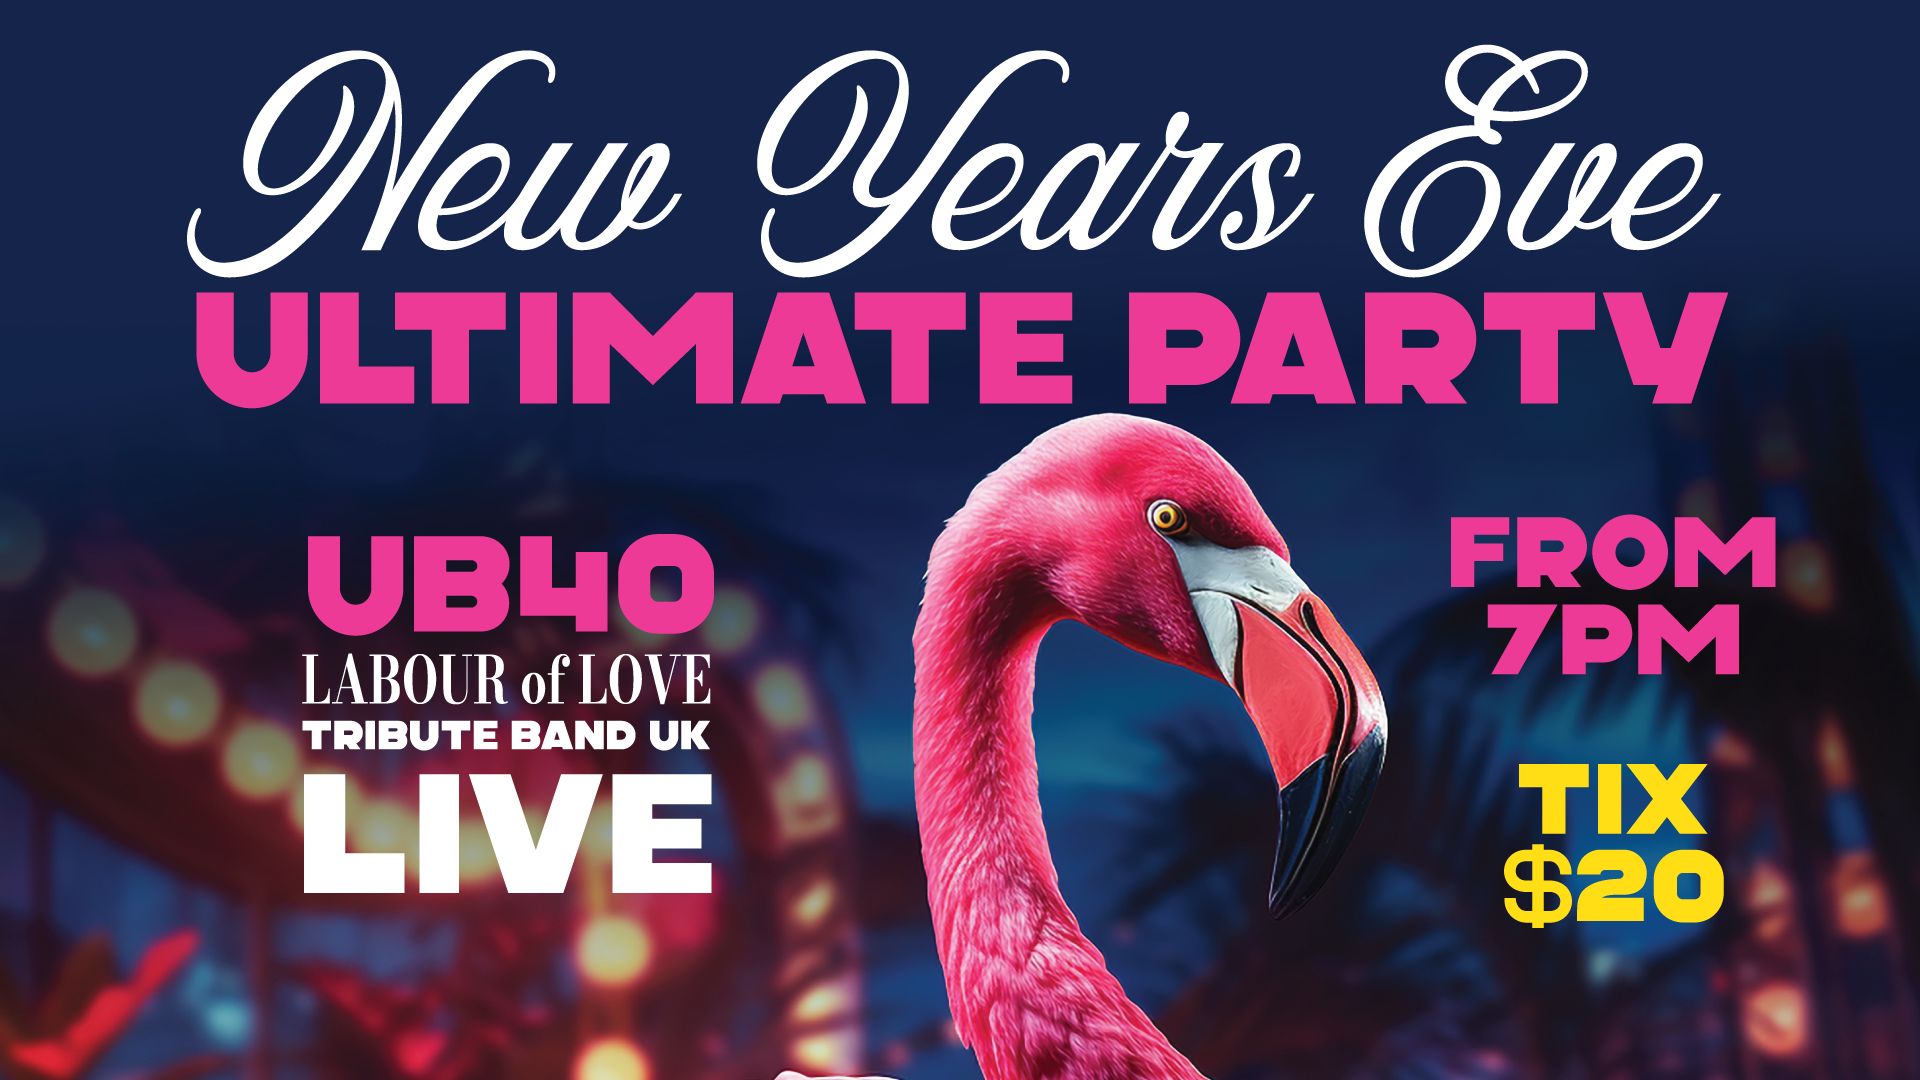 Bar Therapy Mandurah - New Years Eve Ultimate Party